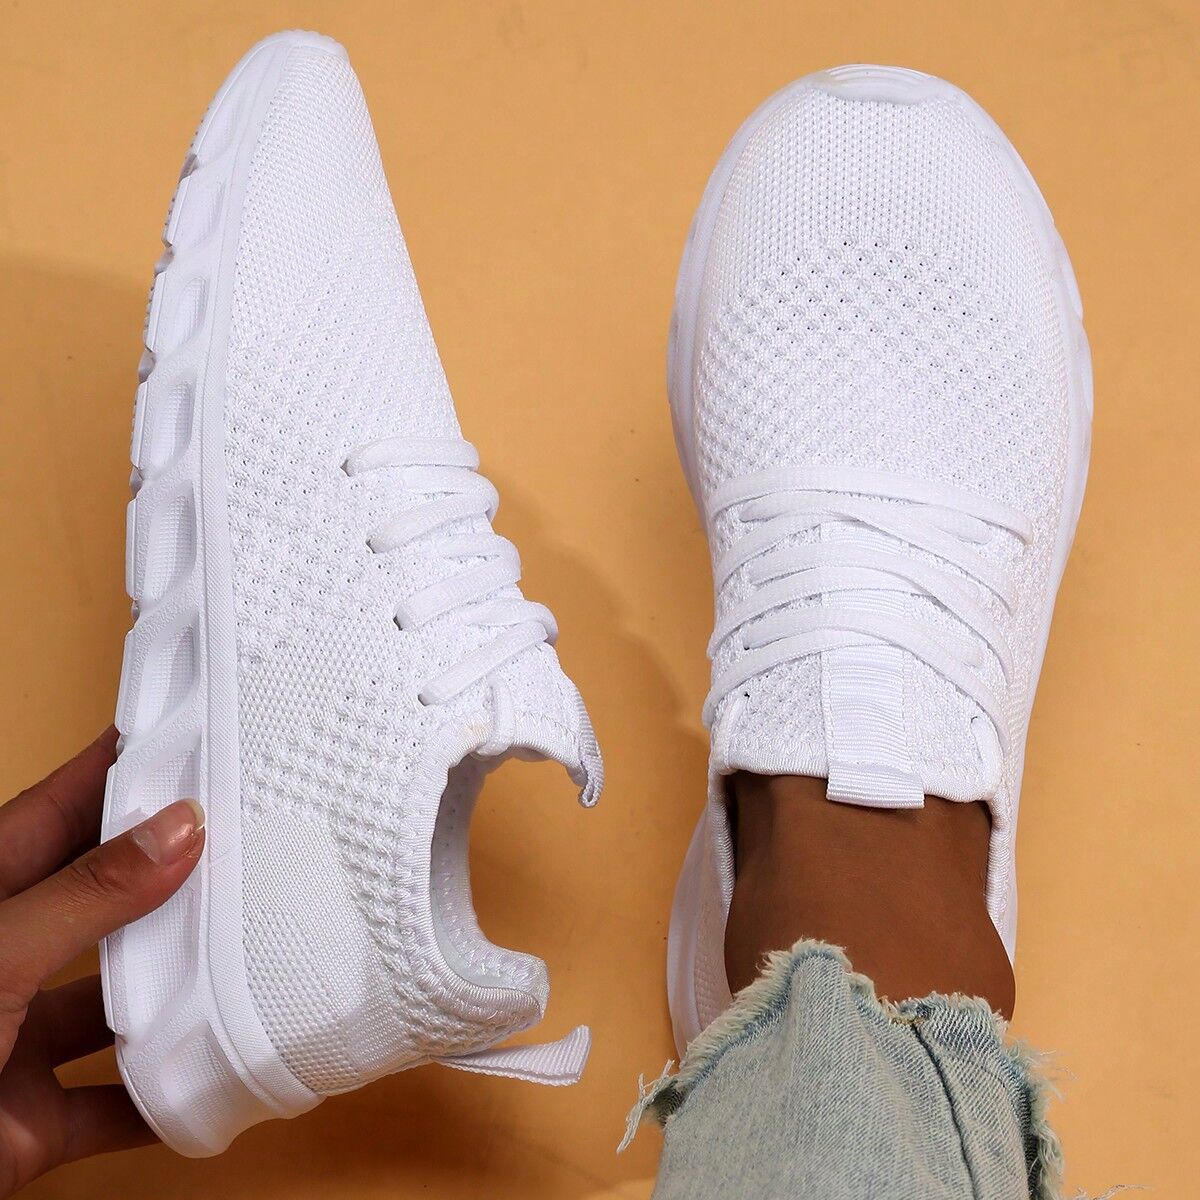 SHEIN Womens Casual Shoes Ladies Shoes Walking Work Shoes Lightweight Tennis Shoes Non Slip Comfortable Running Sneakers White Trainers Chaussures Femme White EUR36,EUR37,EUR38,EUR39,EUR40,EUR41,EUR42 Women